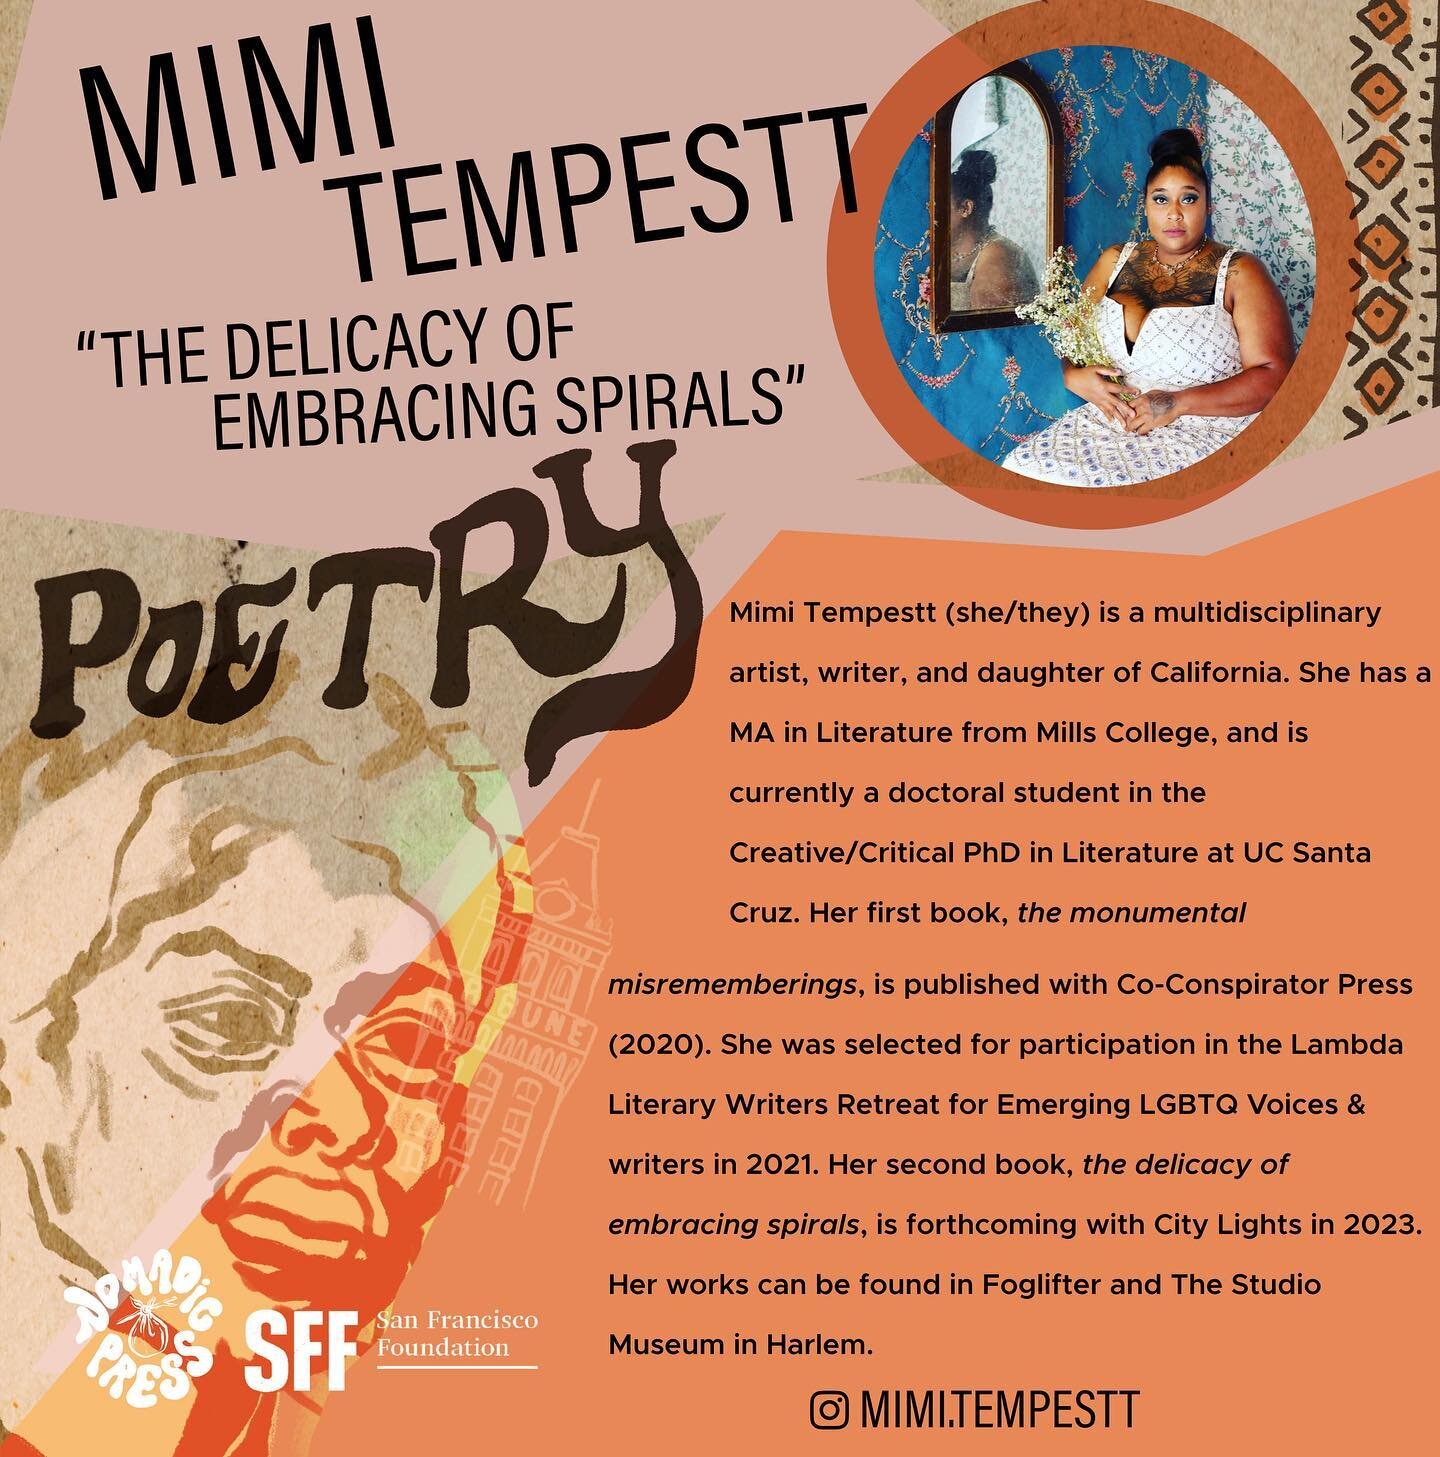 Congratulations to Mimi Tempestt, recipient of the 2023 San Francisco Foundation/Nomadic Press Literary Award for Poetry. Mimi will receive $5000 for the title piece excerpted from her second book &ldquo;the delicacy of embracing spirals&rdquo;&mdash